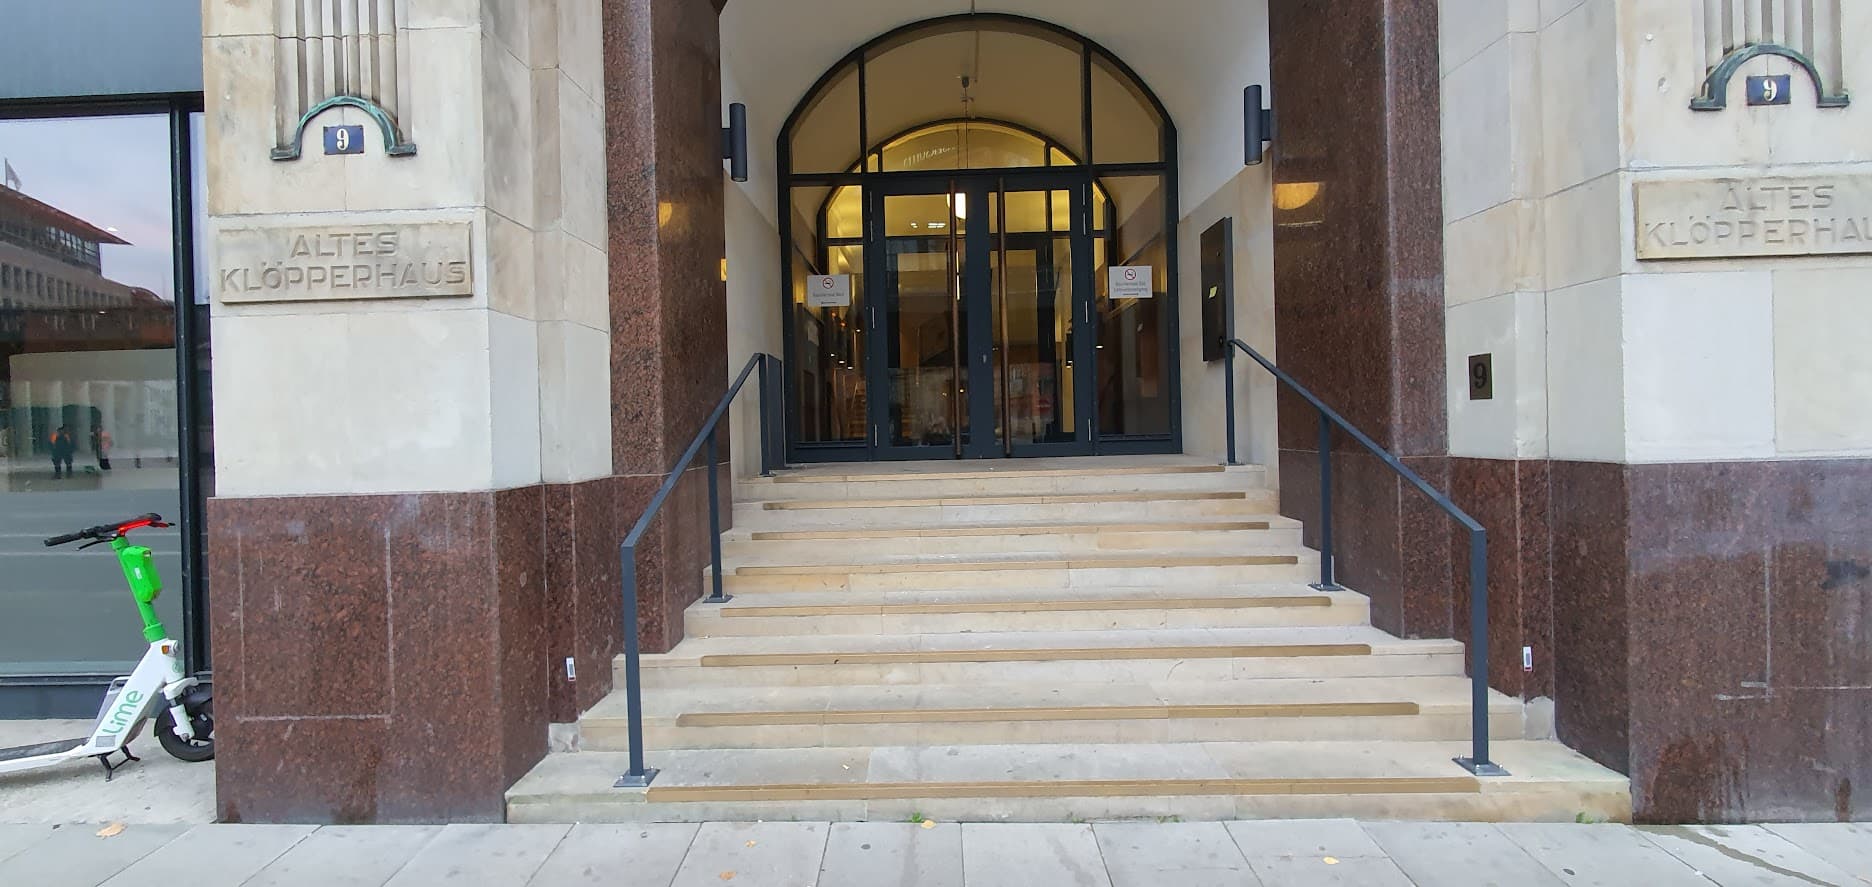 Entrance of my workplace in the historical building in Hamburg, called Kloepperhaus, it is inaccessible for wheelchair users due to stairs